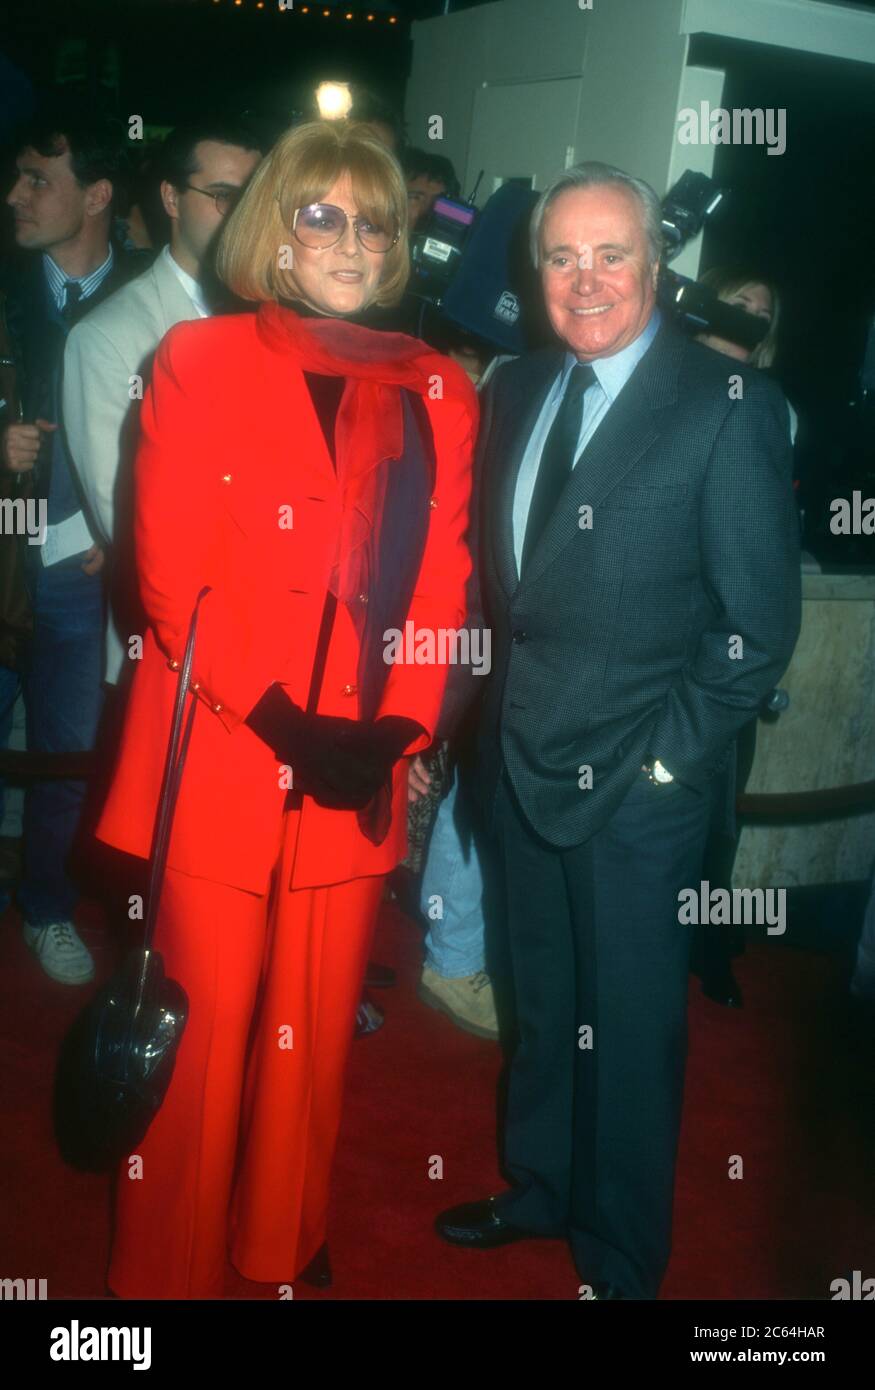 Westwood, California, USA 14th December 1995 Actress Ann-Margret and actor Jack Lemmon attend Warner Bros Pictures' 'Grumpier Old Men' Premiere on December 14, 1995 at Mann Bruin Theatre in Westwood, California, USA. Photo by Barry King/Alamy Stock Photo Stock Photo